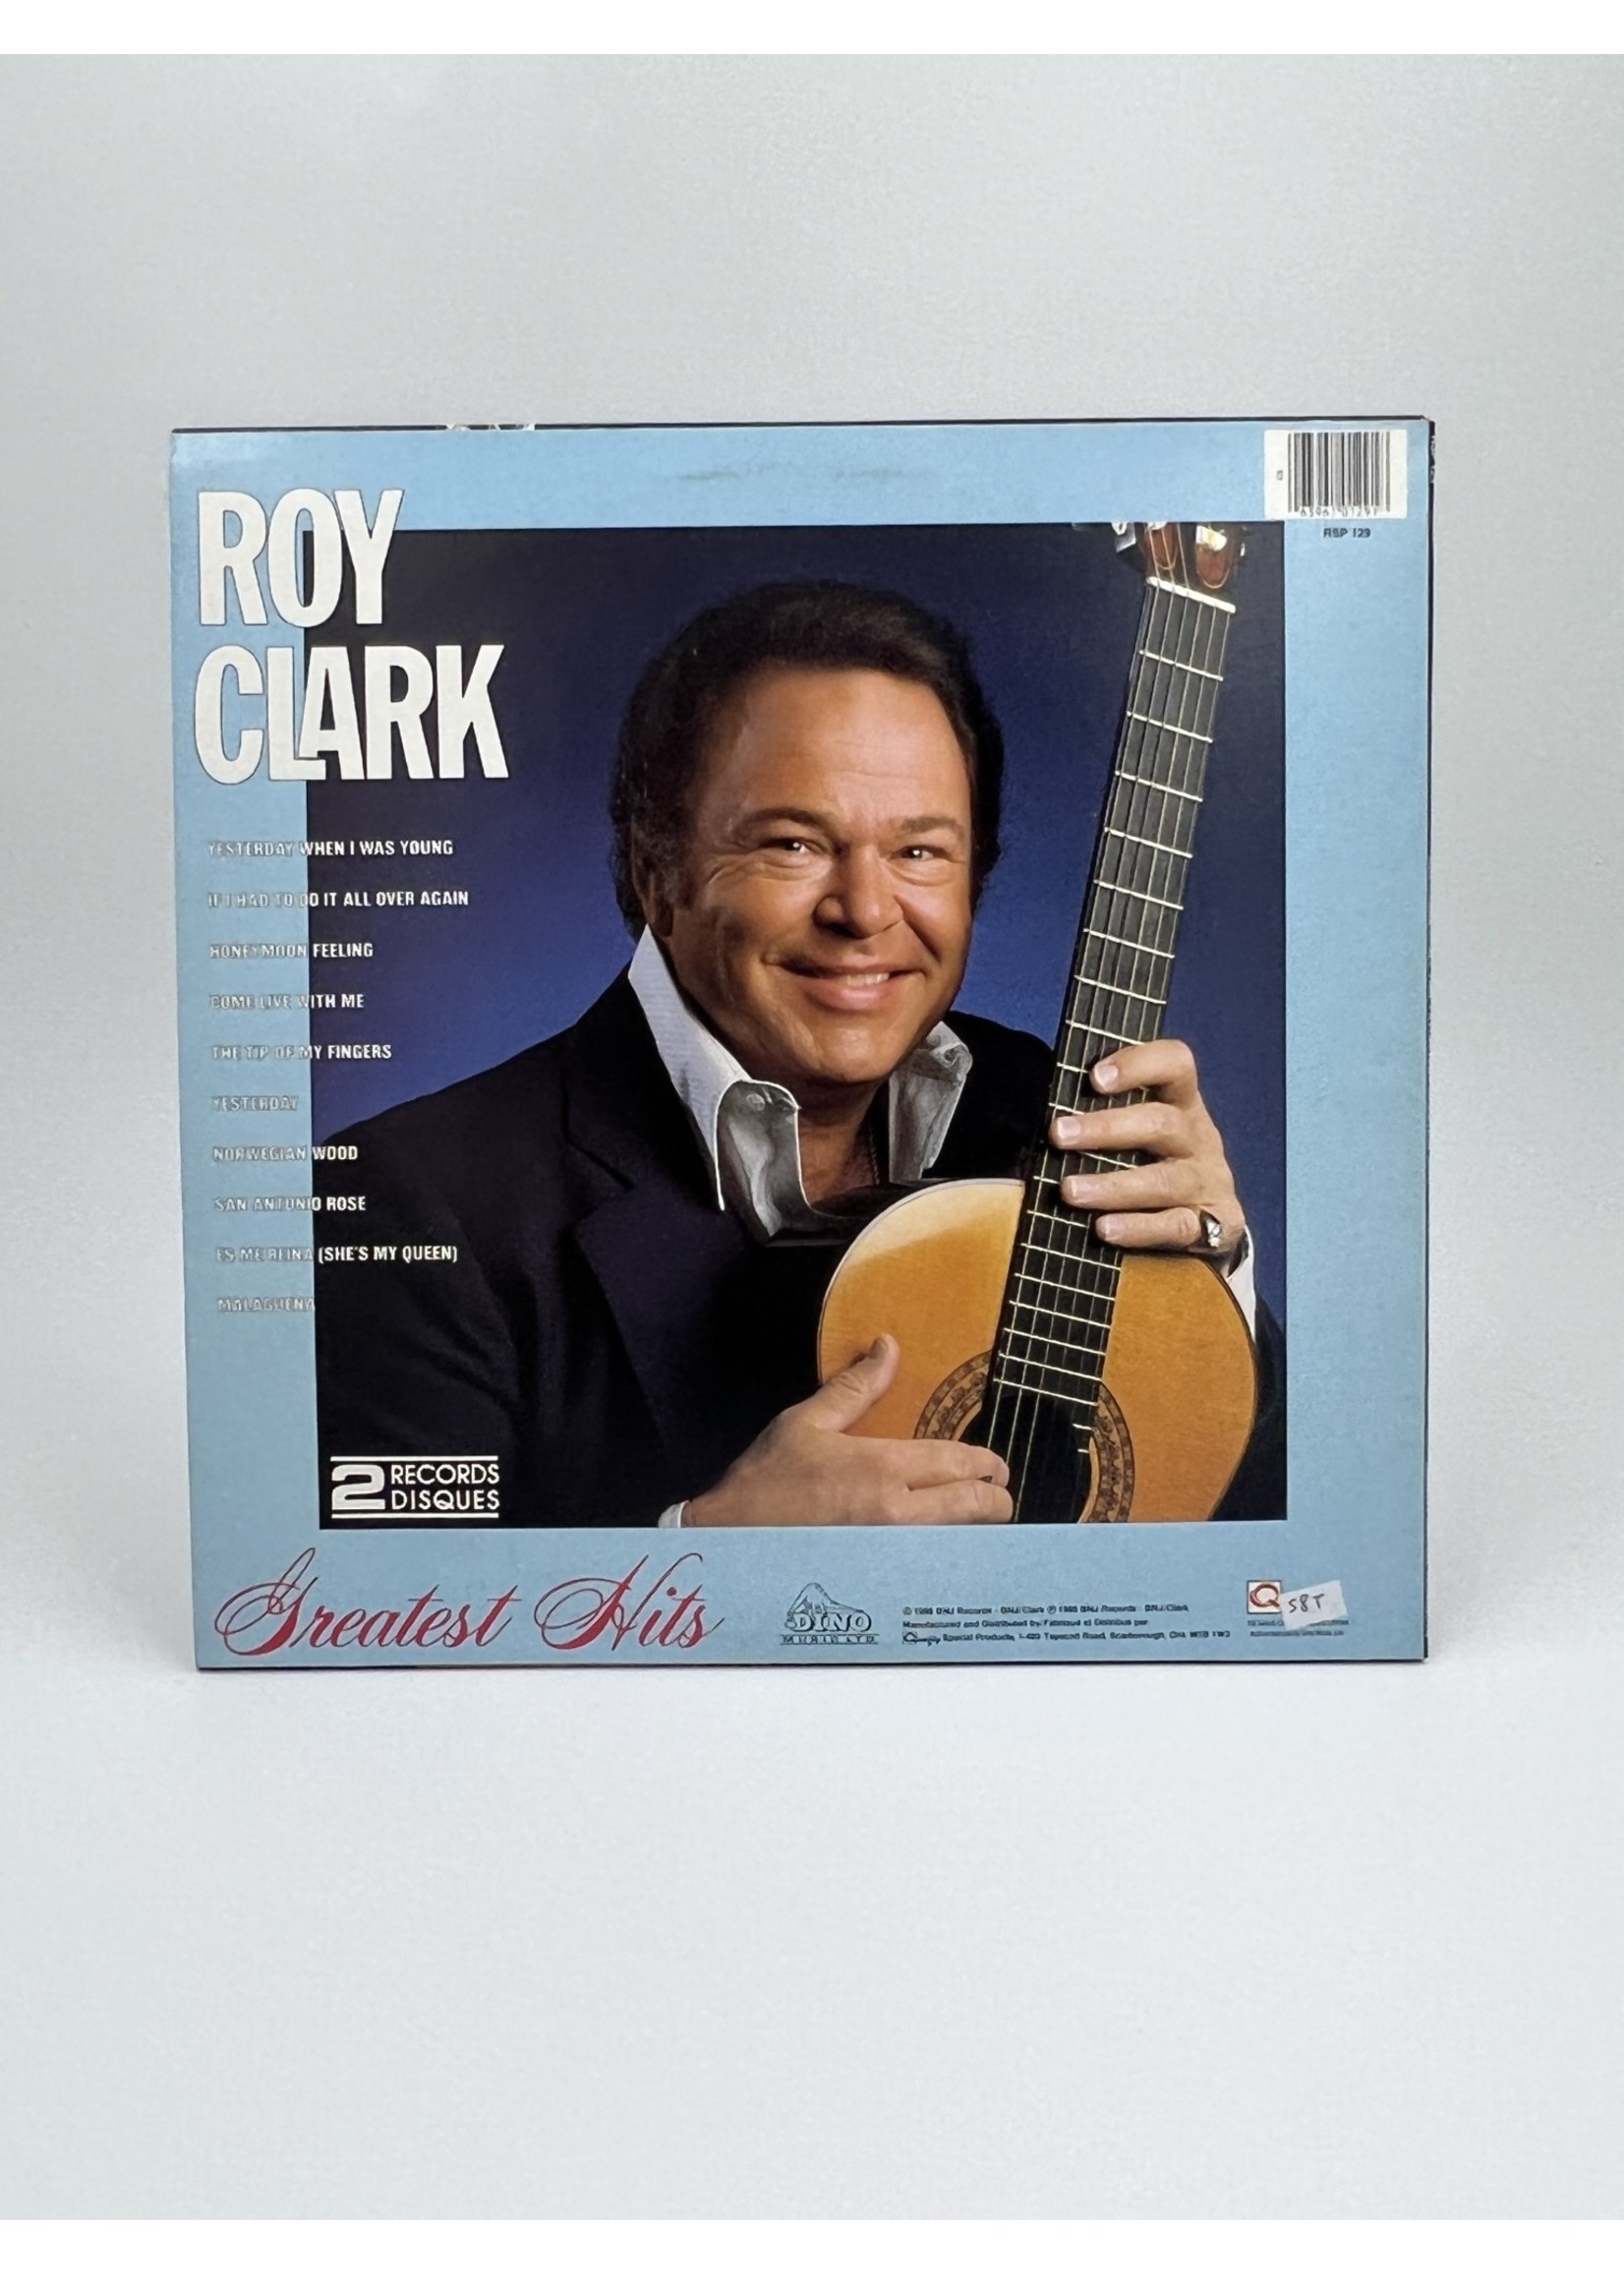 LP Roy Clark plays All Time Favorites LP Record